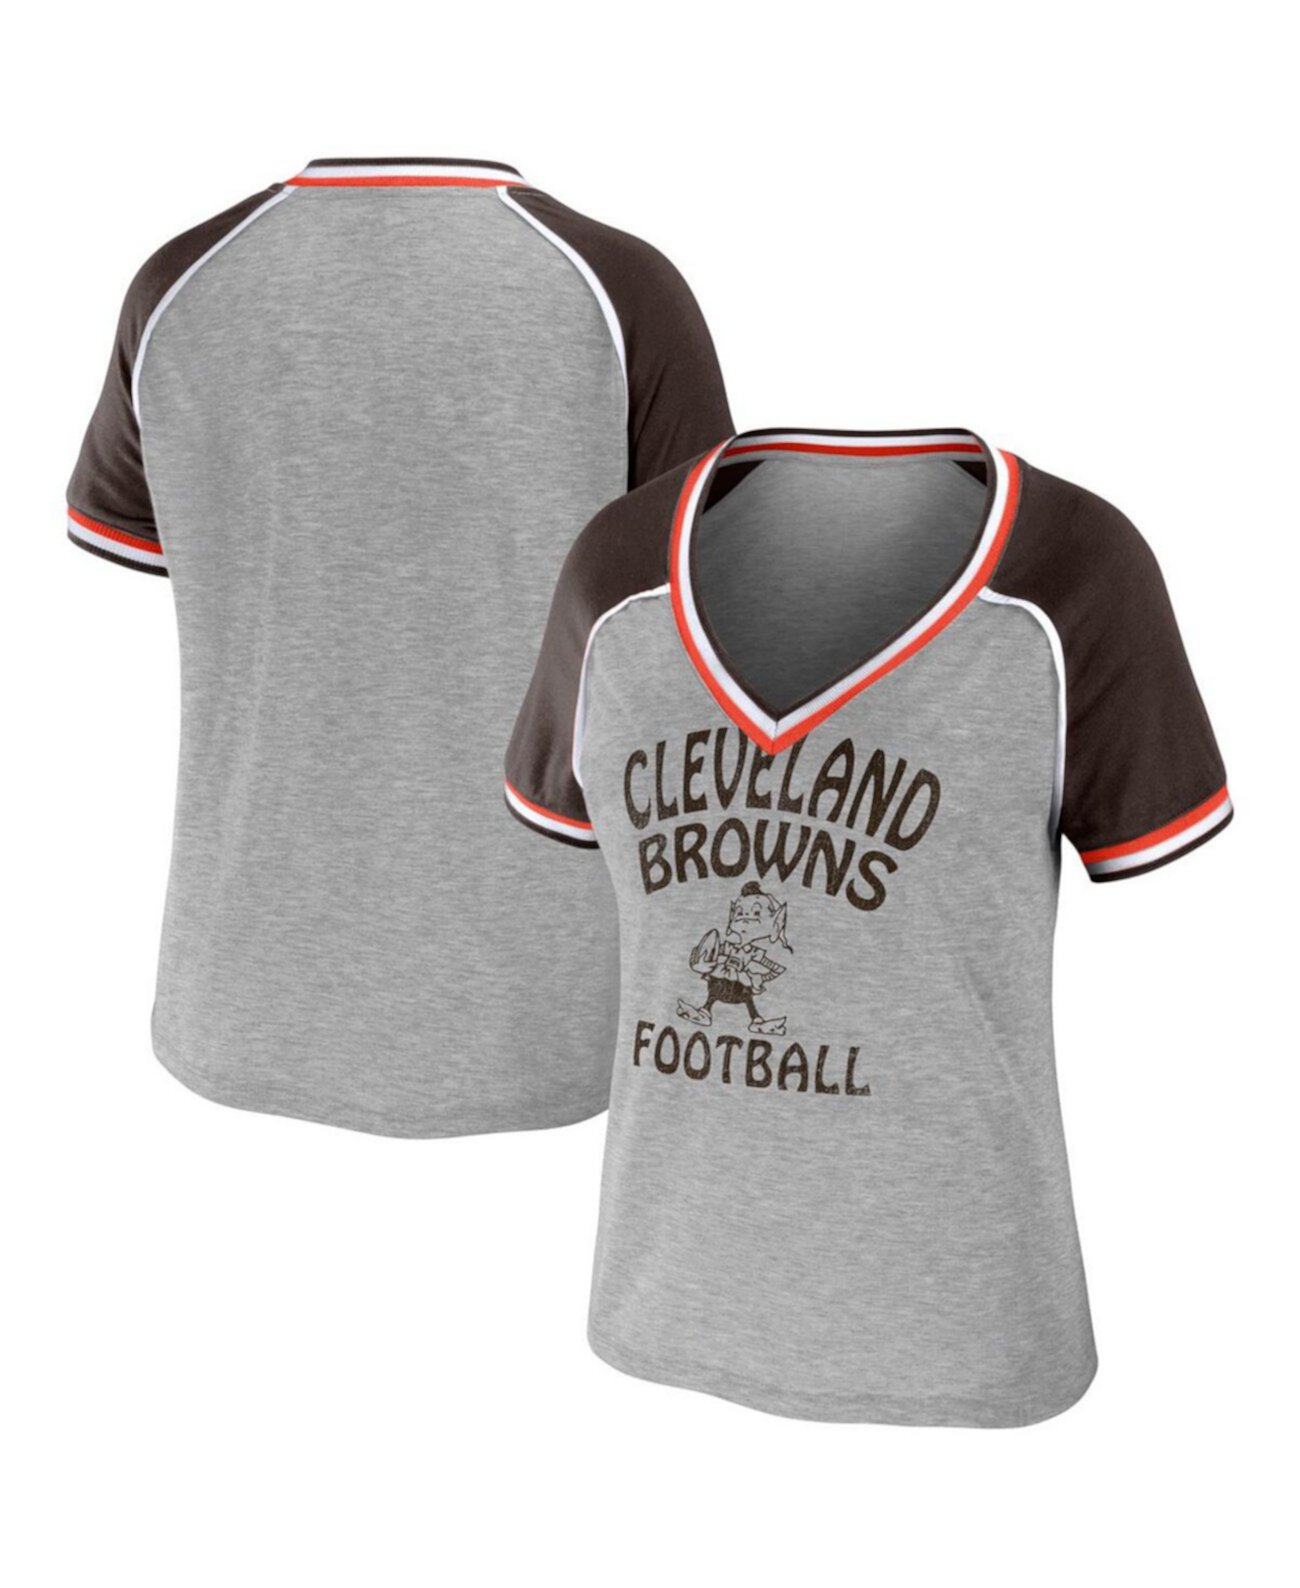 Women's Heather Gray Distressed Cleveland Browns Cropped Raglan Throwback V-Neck T-shirt WEAR by Erin Andrews